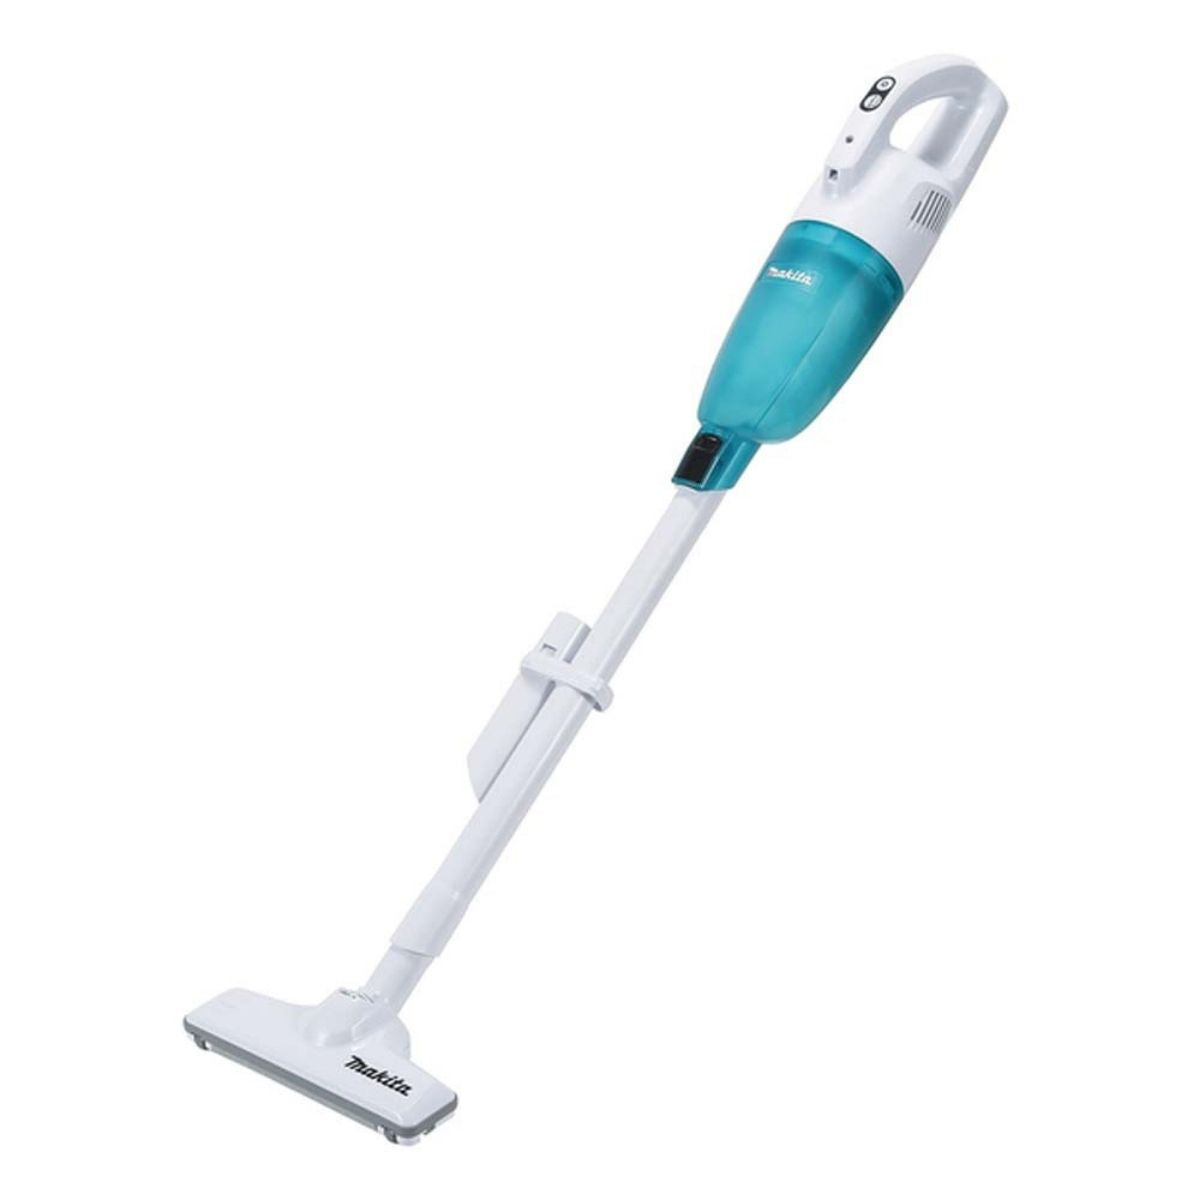 Makita CL117FDX2 12V CXT Vacuum Cleaner Body Only